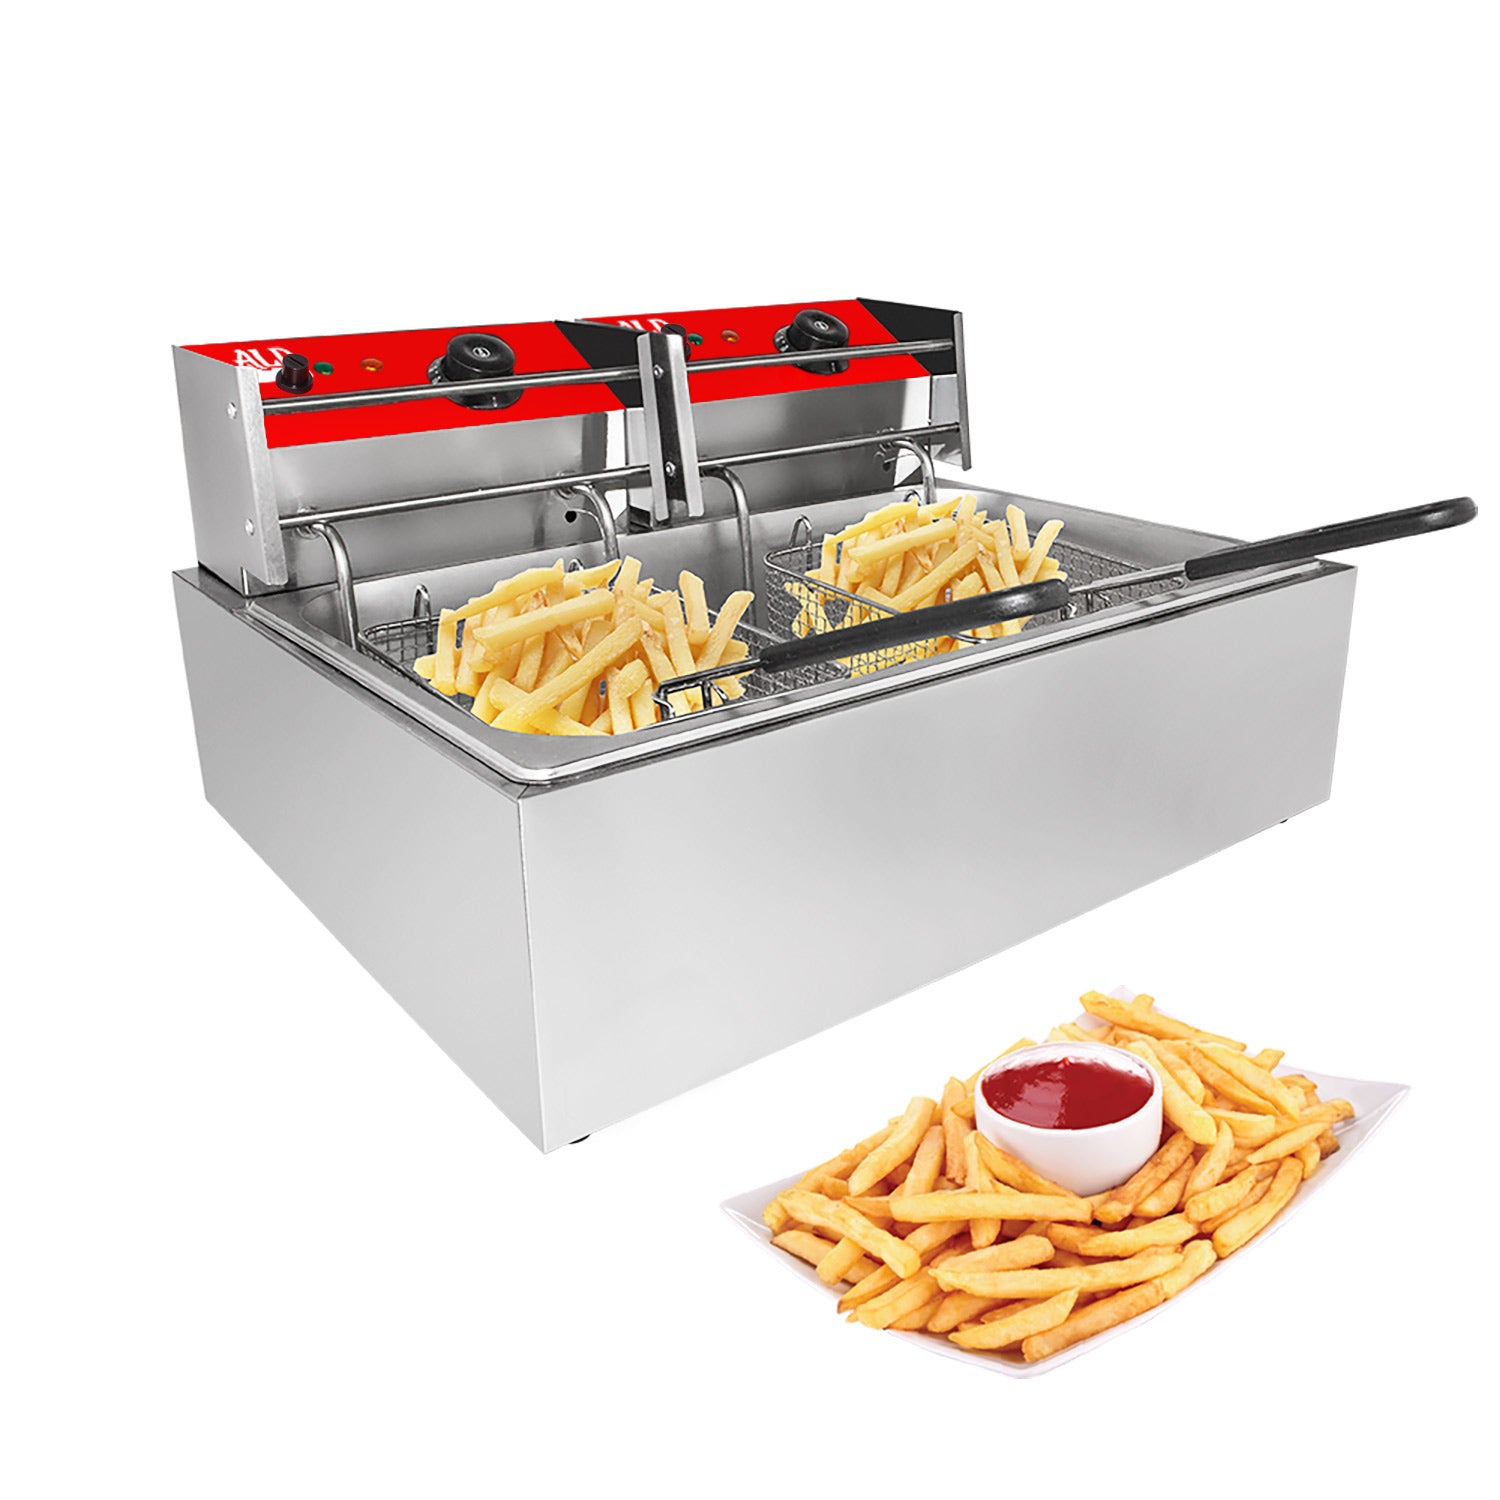 23.6 L Deep Fryers,Electric Commercial Deep Fryer with Double Basket Large Countertop Stainless Steel 2 Baskets Deep Fryers French Fries Fish 